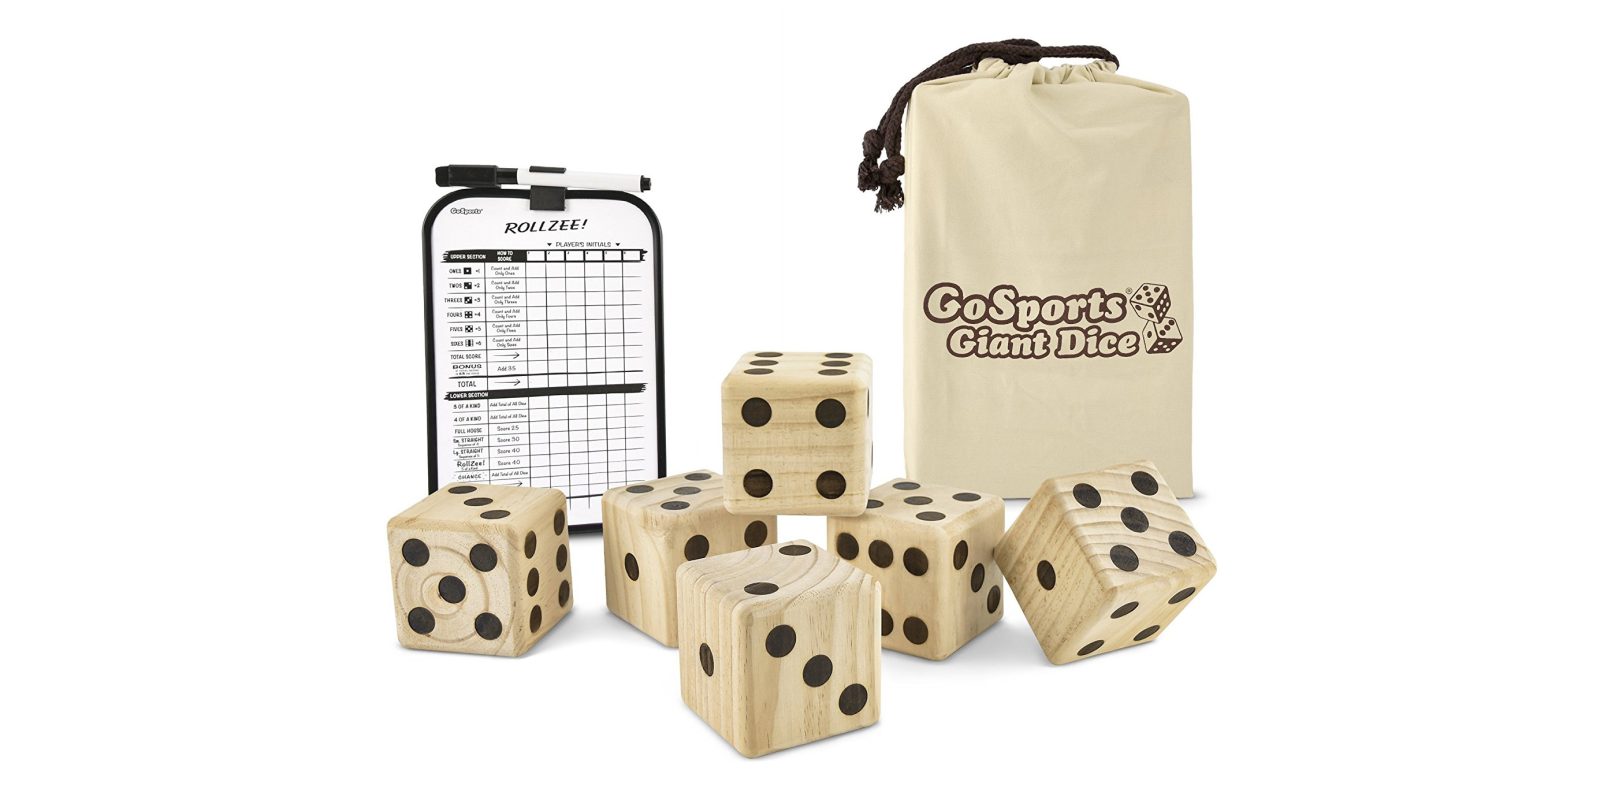 this-giant-dice-playing-set-is-made-for-summer-fun-20-prime-shipped